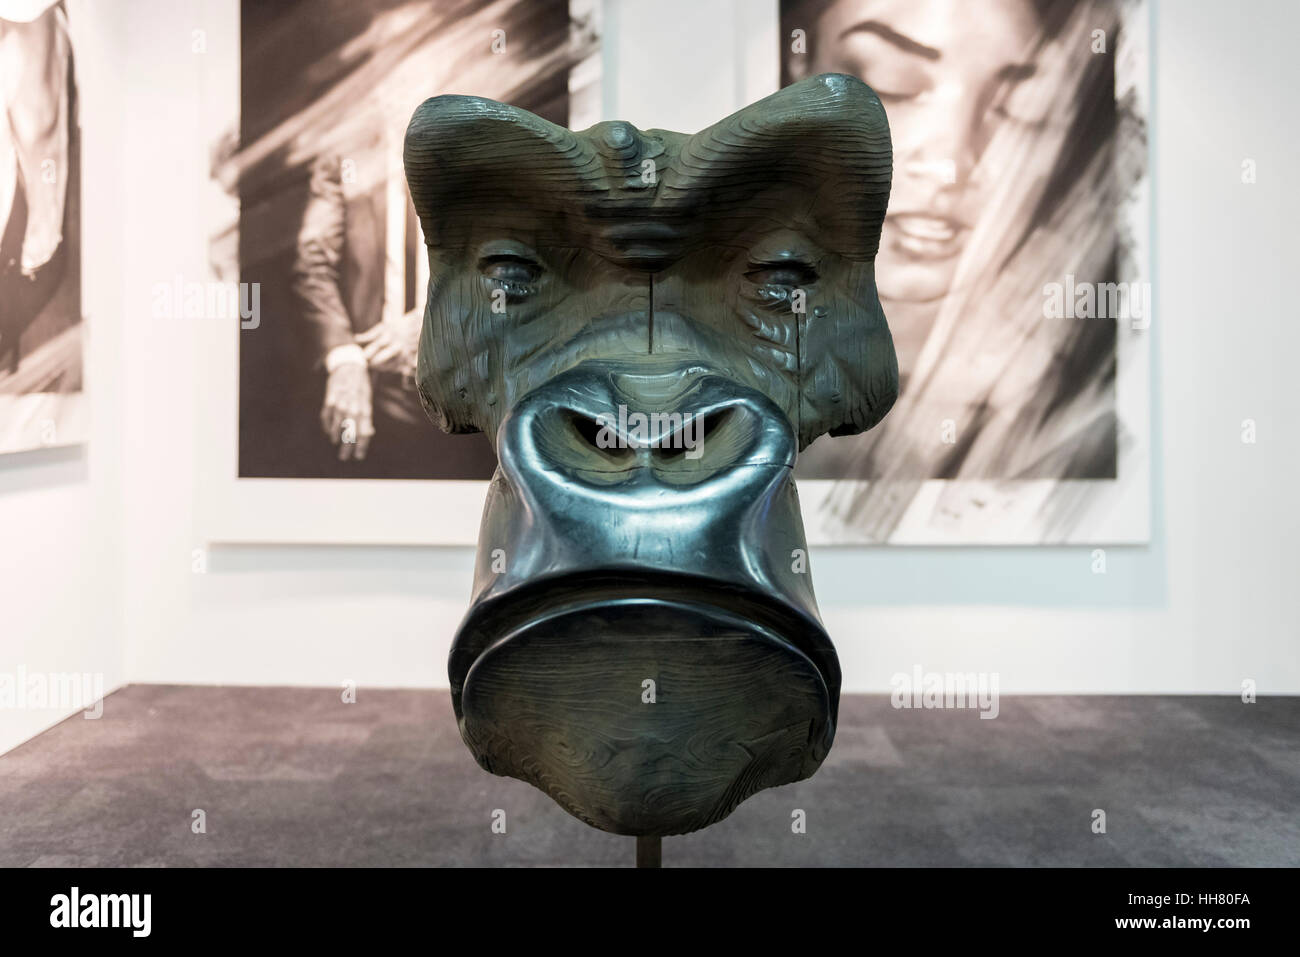 London, UK. 17th Jan, 2017. A striking face of a gorilla is on show by the Mazel Galerie from Brussels, at the preview of the 29th London Art Fair, the UK's premier fair for Modern British and contemporary art, taking place at the Business Design Centre in Islington from 18-22 January 2017, where 129 galleries from 18 different countries will be presenting their artworks. Credit: Stephen Chung/Alamy Live News Stock Photo